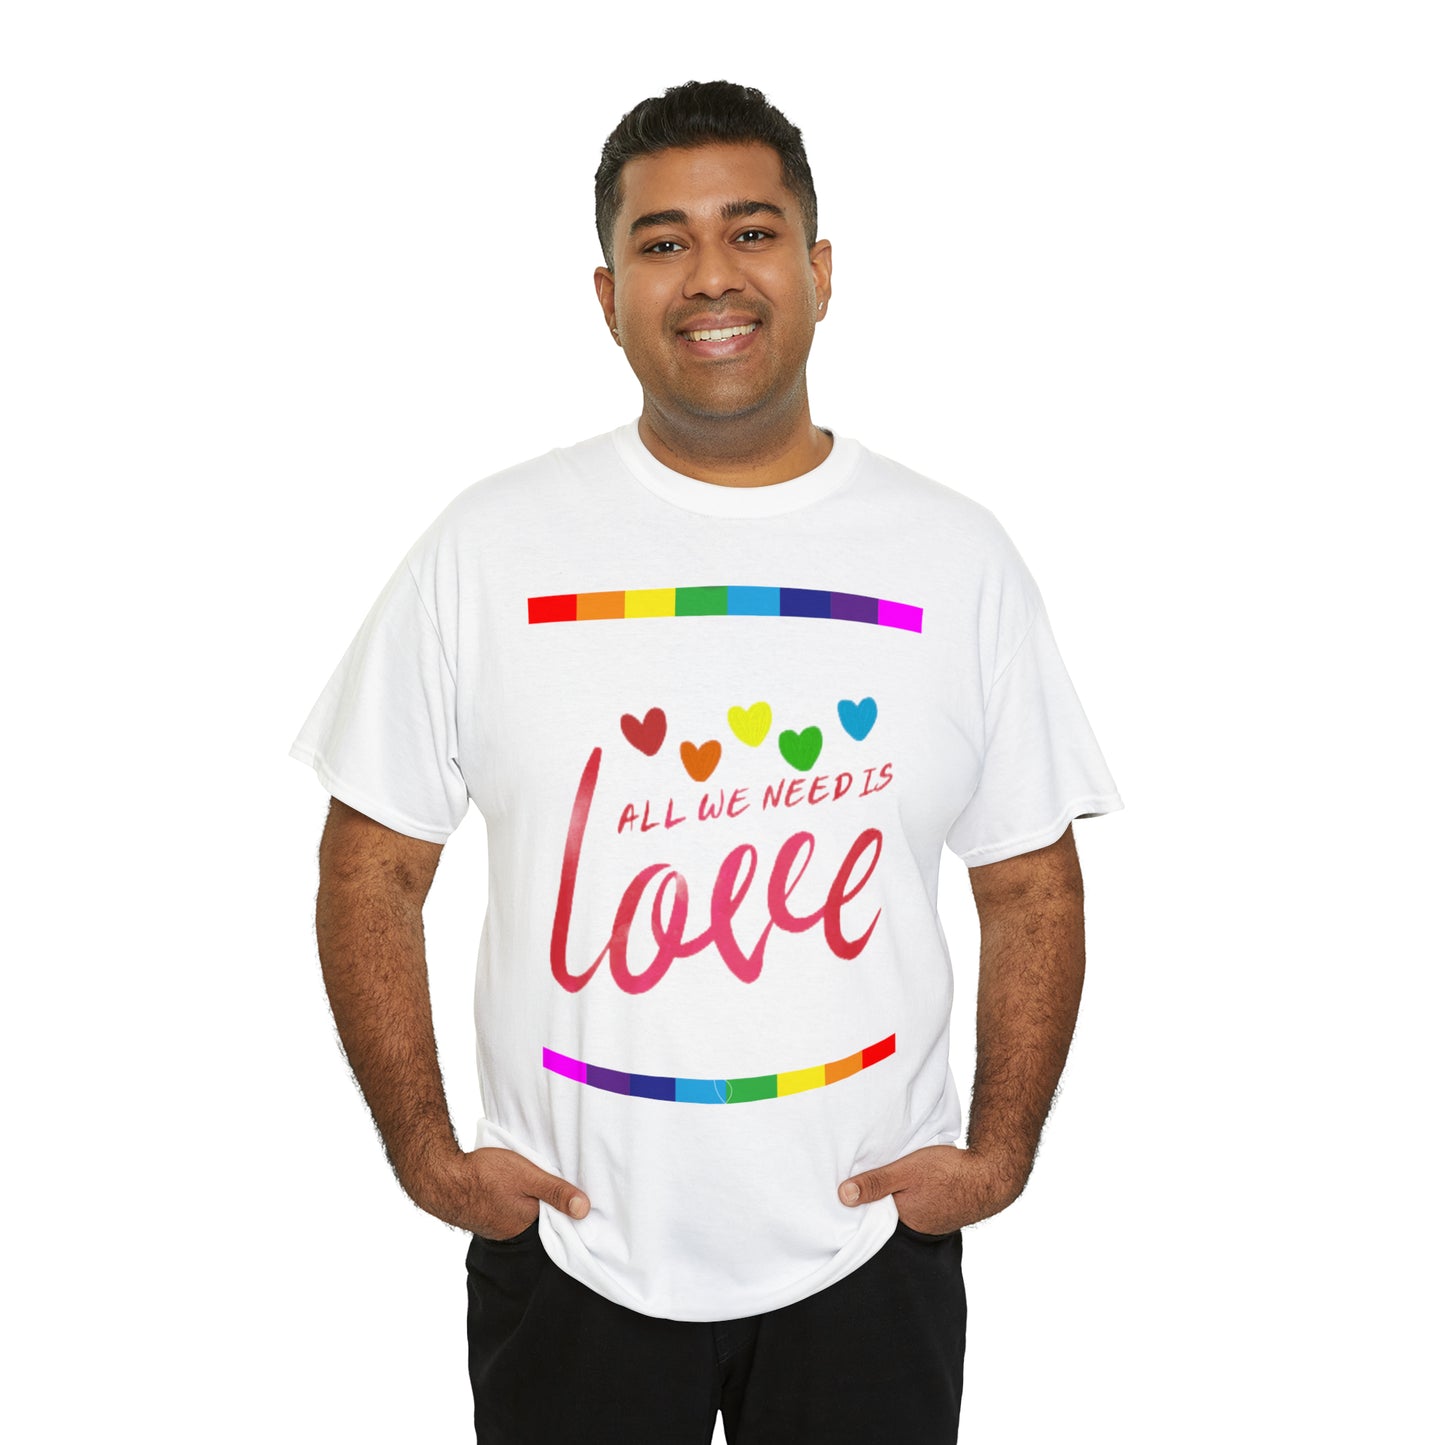 "All we need is Love" Love #2 Women's Iconic T-Shirt